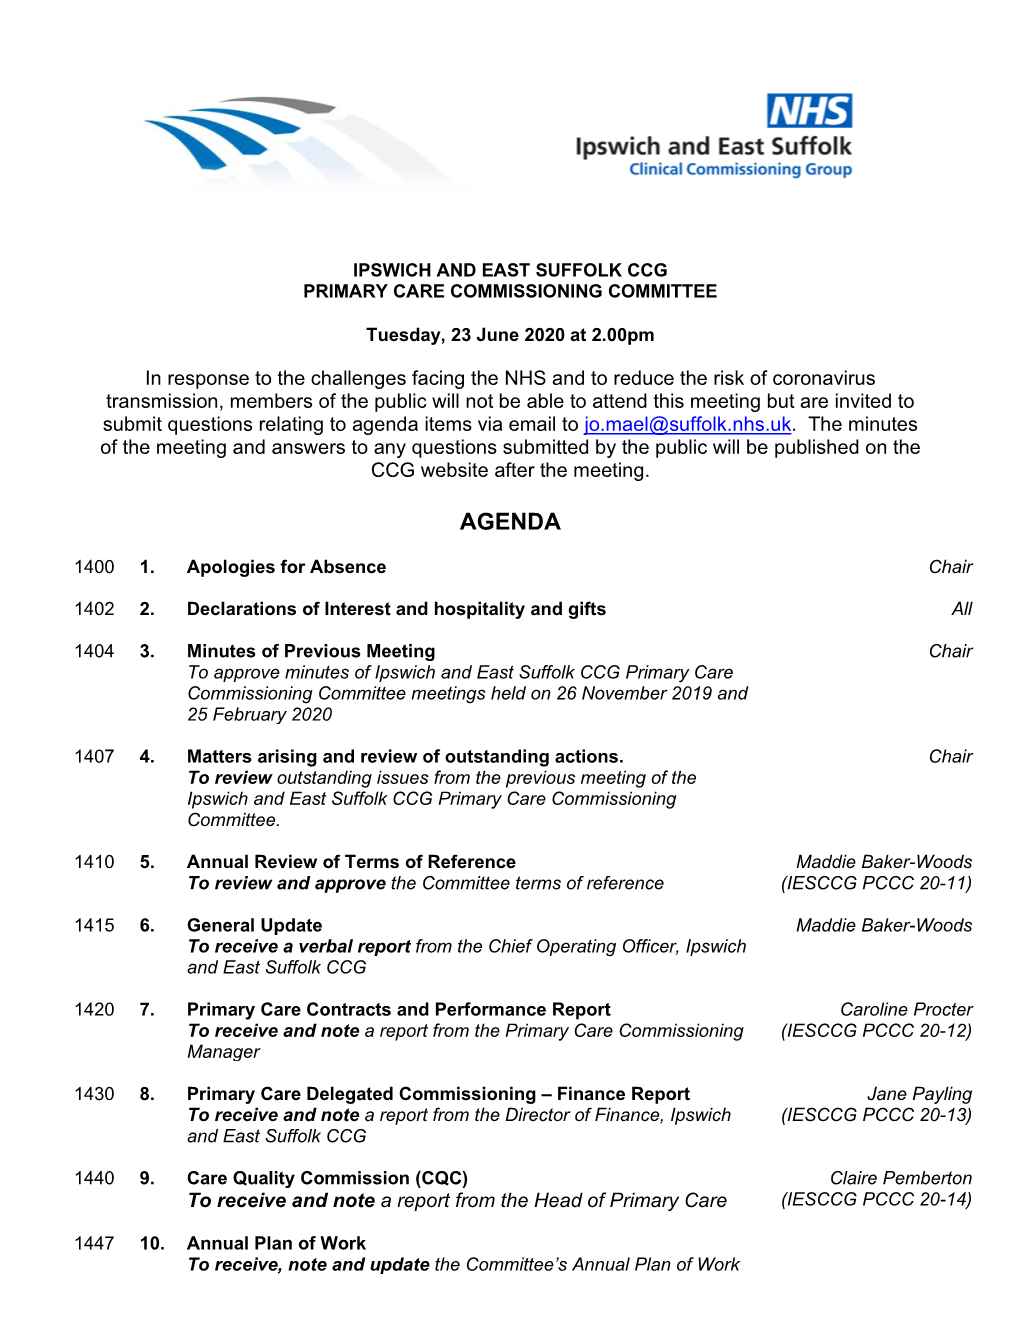 Agenda Items Via Email to Jo.Mael@Suffolk.Nhs.Uk